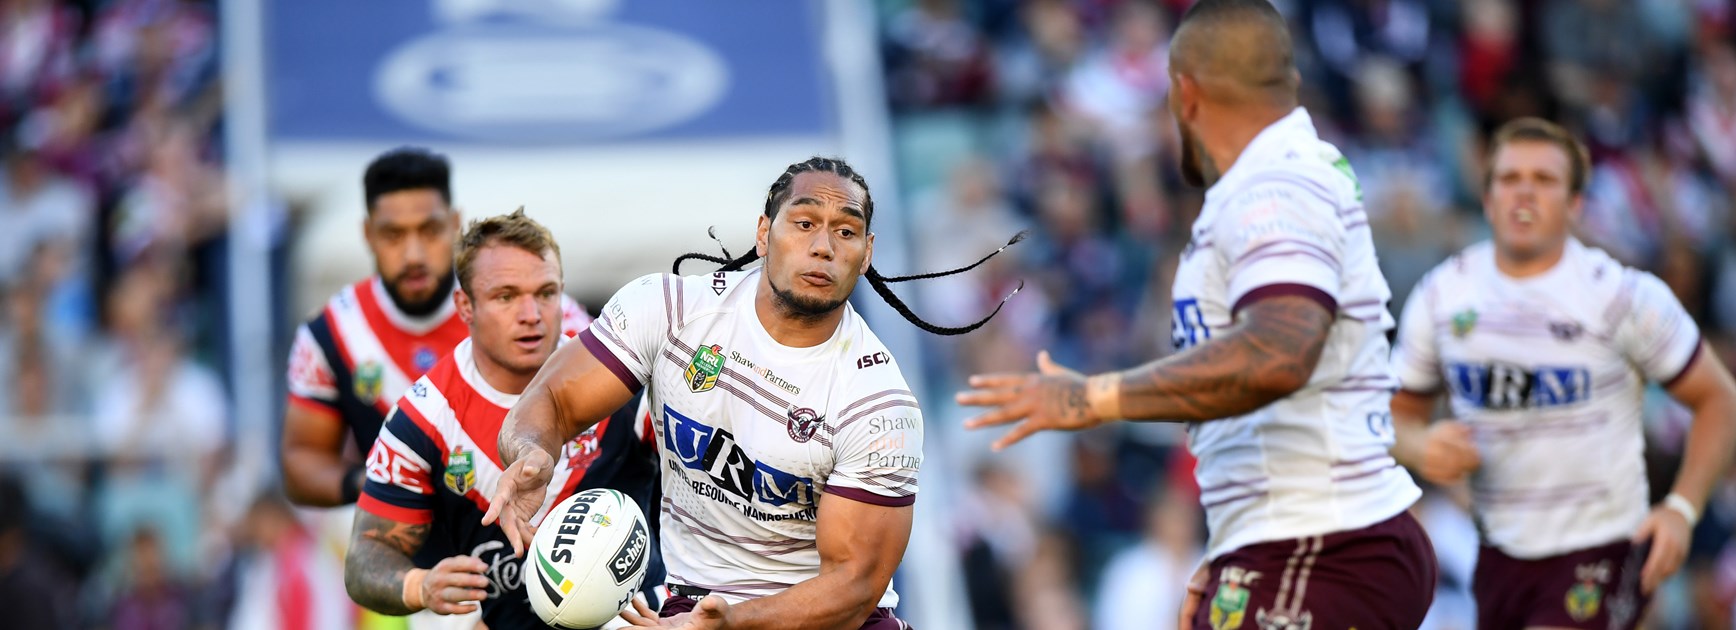 Sea Eagles lose 22-20 to Roosters